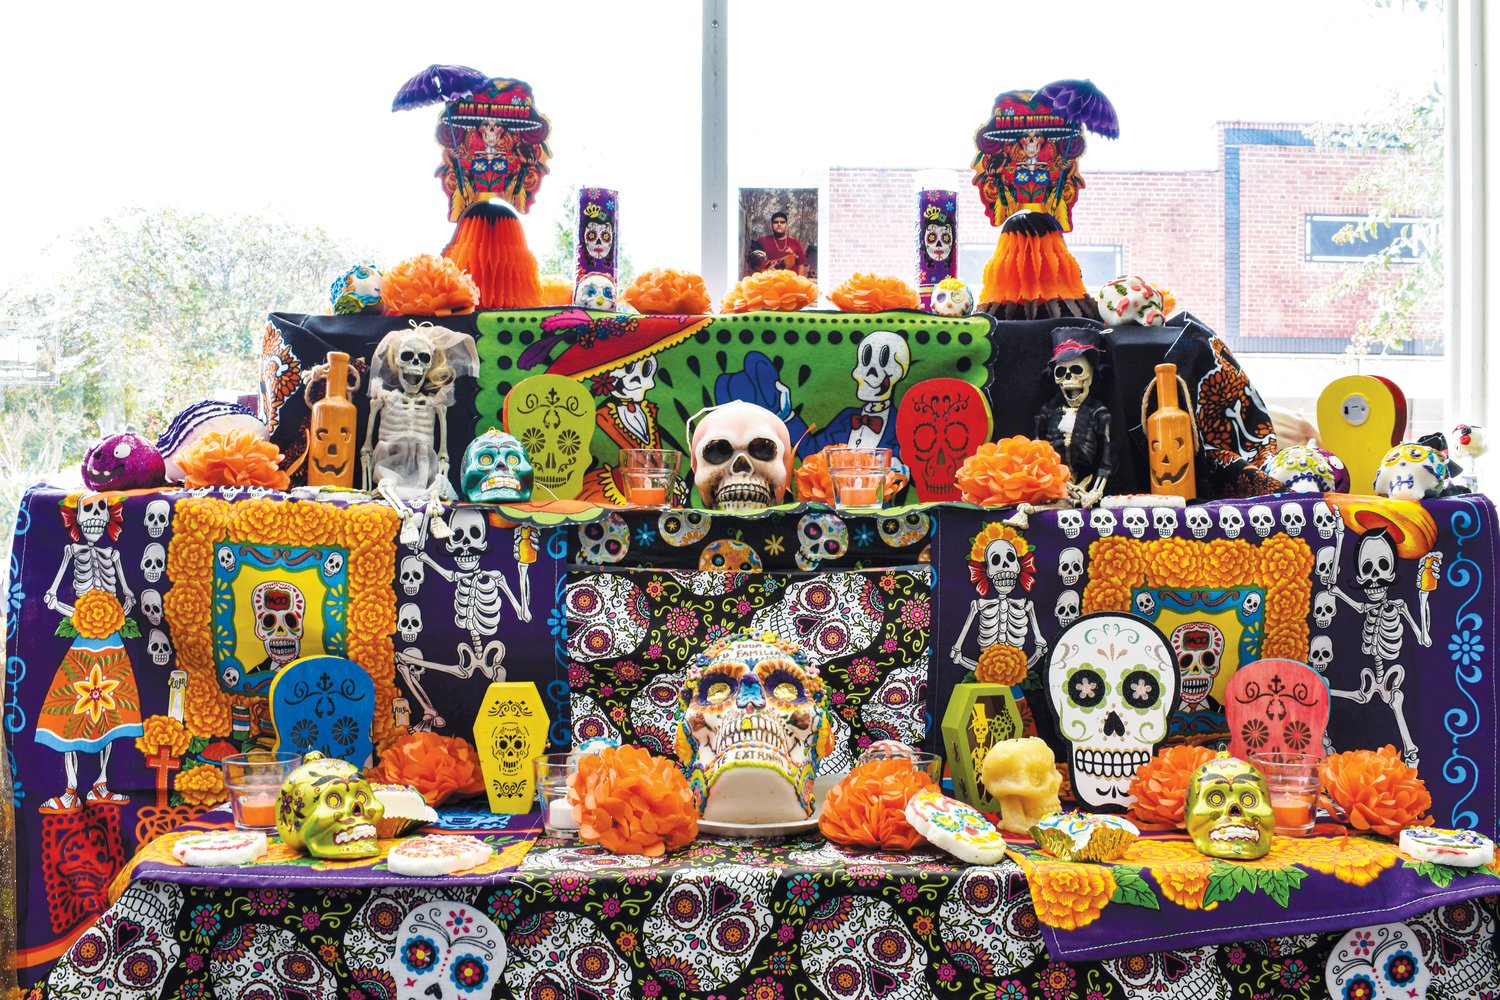 Communities In Schools’ Maria Soto constructed an altar inside the nonprofit’s Siler City office for Day of the Dead, or Día de Muertos, a Mexican and Latin American holiday in which people celebrate the lives of their deceased loved ones. She constructed this year's altar in honor of Bryan Vilchis, a Northwood student who died in a car crash on Oct. 23. .